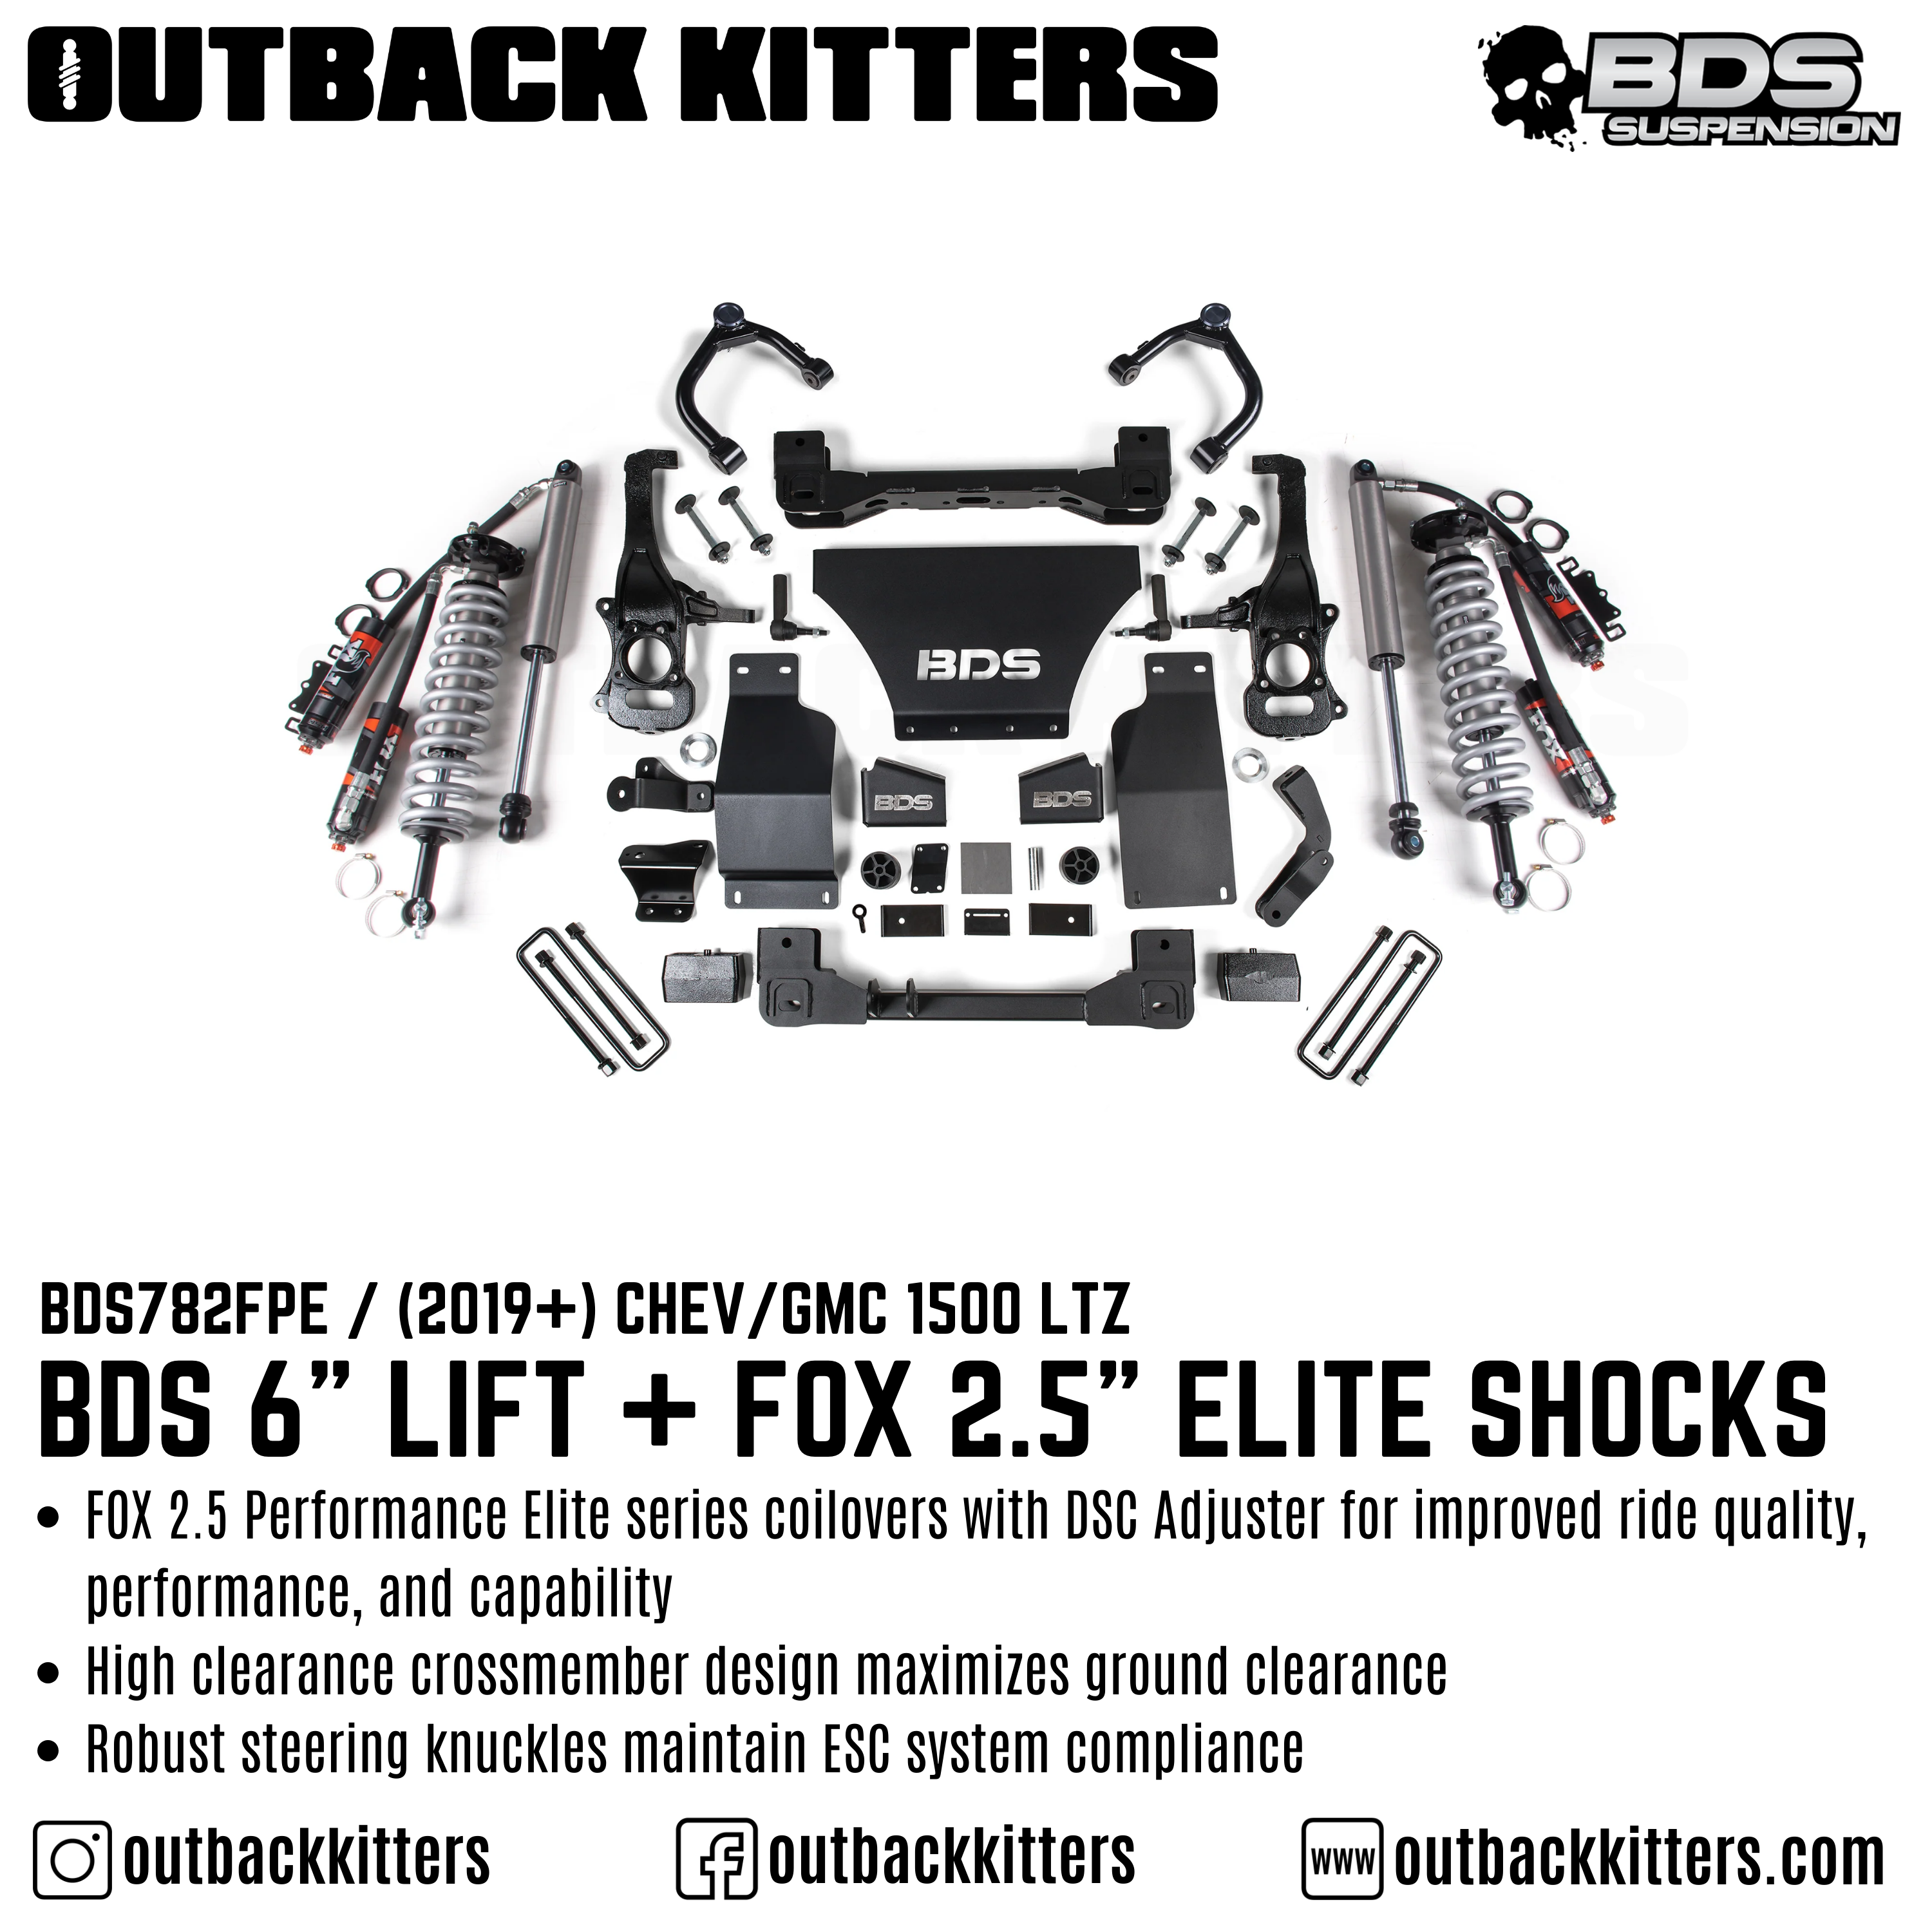 BDS Suspension 6" Lift Kit for 2019+ Chevy Silverado 1500 with Fox Shocks - Outback Kitters